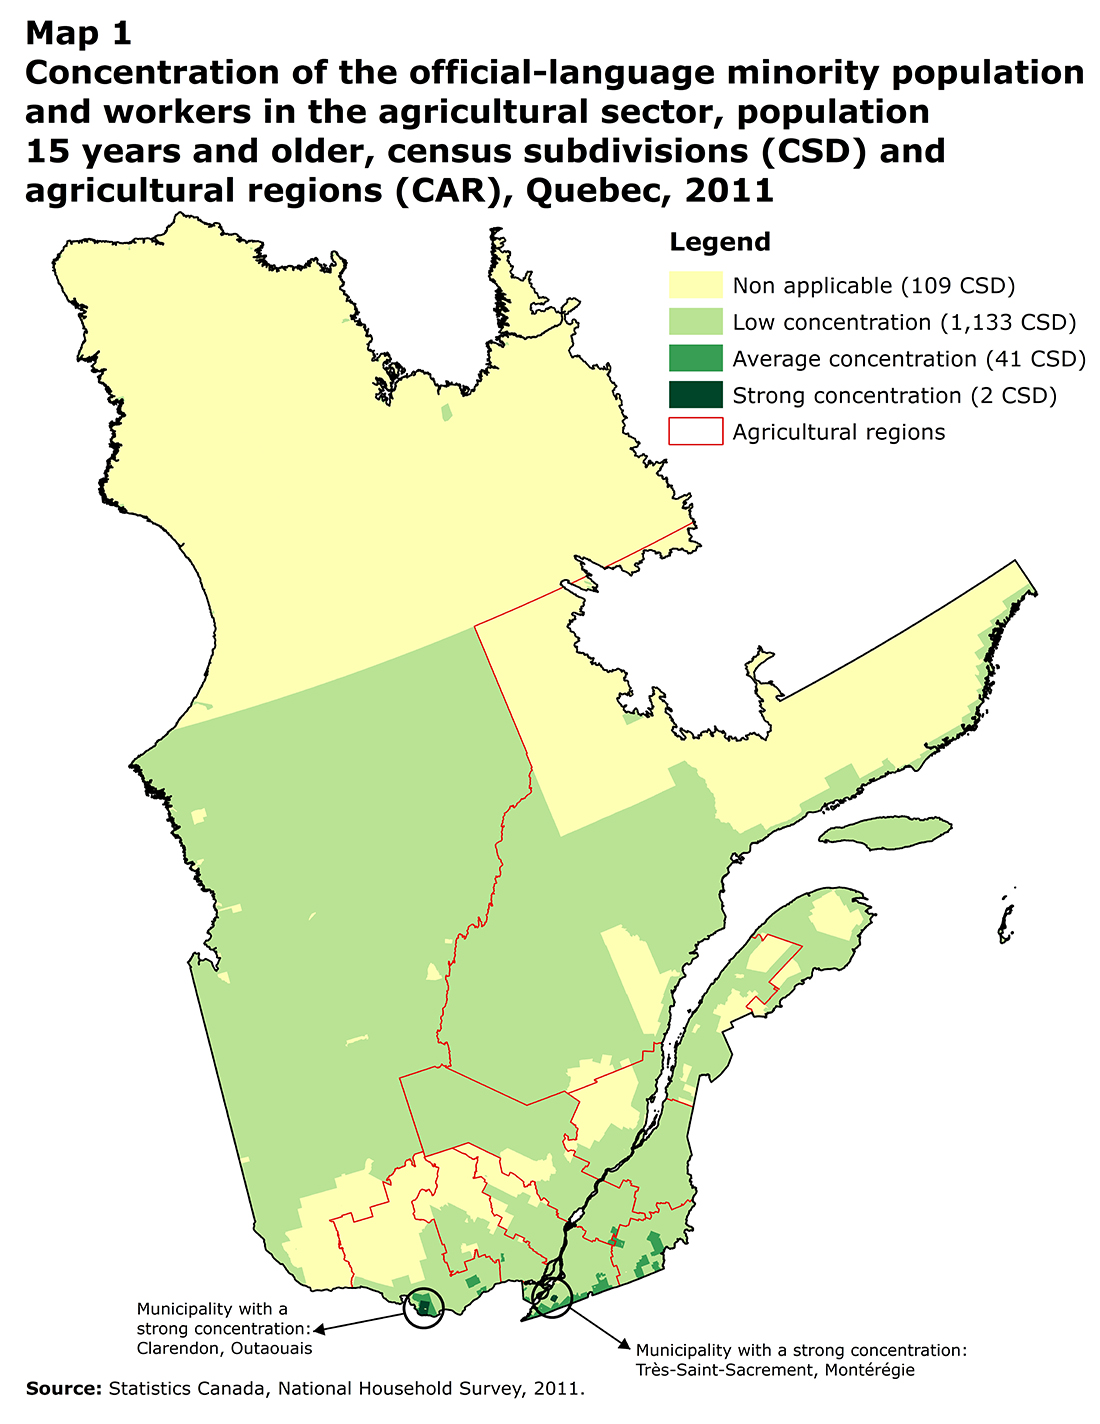 Map 1 Concentration of the official-language minority population and workers in the agricultural sector, population 15 years and older, census subdivisions (CSD) and agricultural regions (CAR), Quebec, 2011